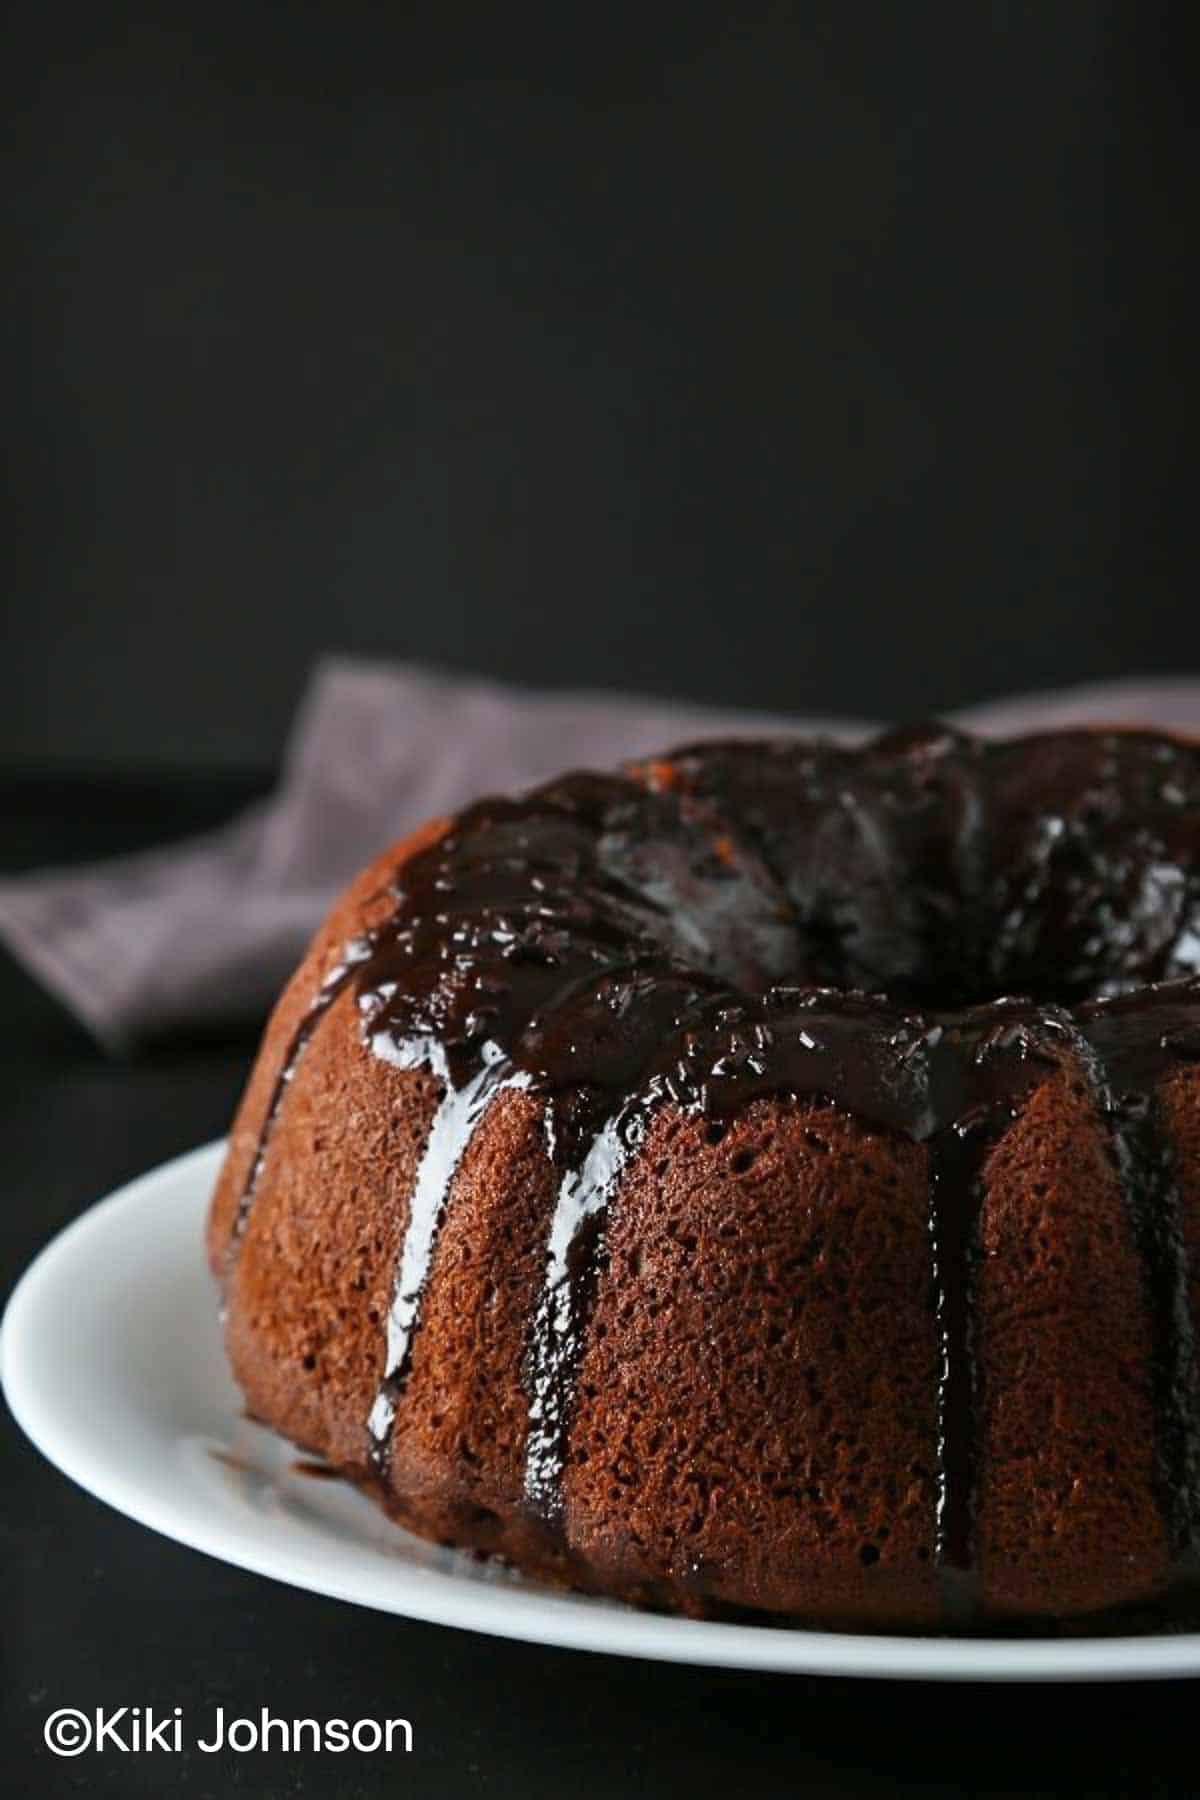 whiskey drizzle being drizzled over a warm chocolate bundt cake